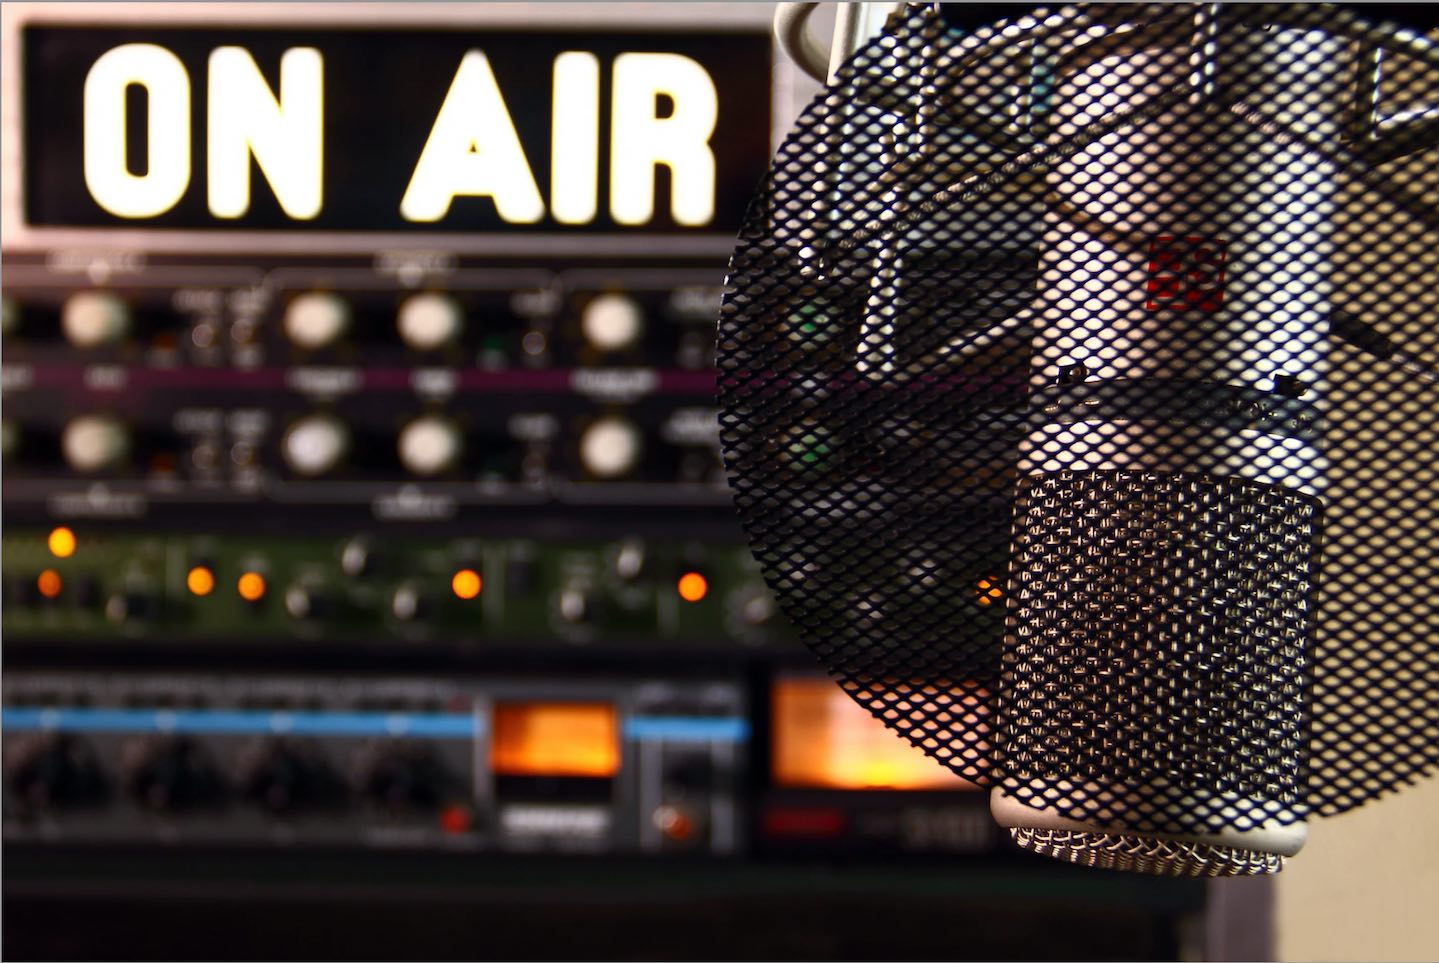 An illuminated 'on air' sign, with a microphone in the foreground.